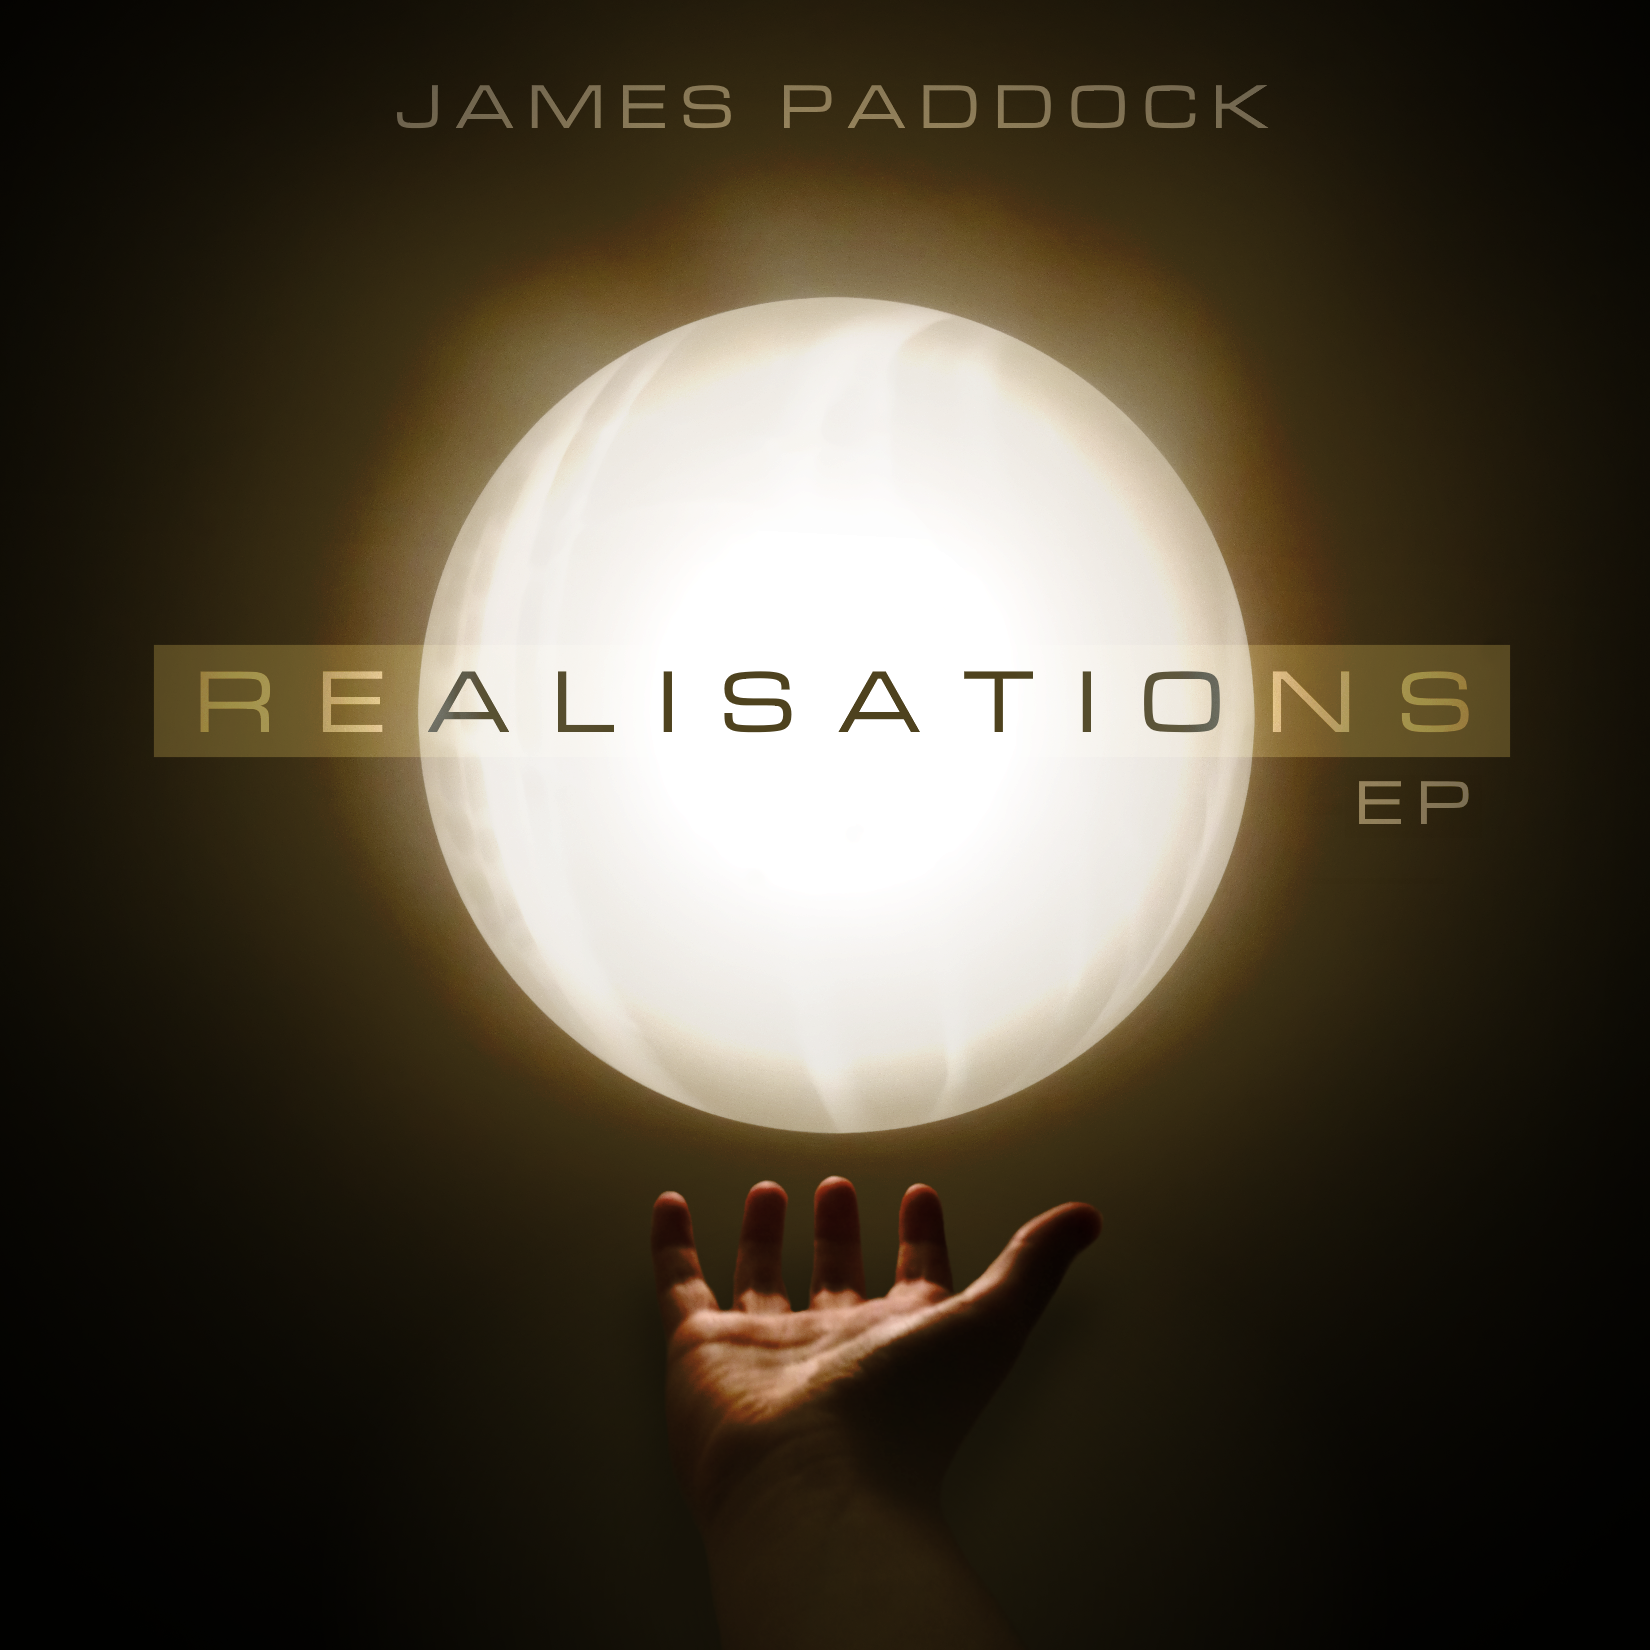 “Realisations EP” released!